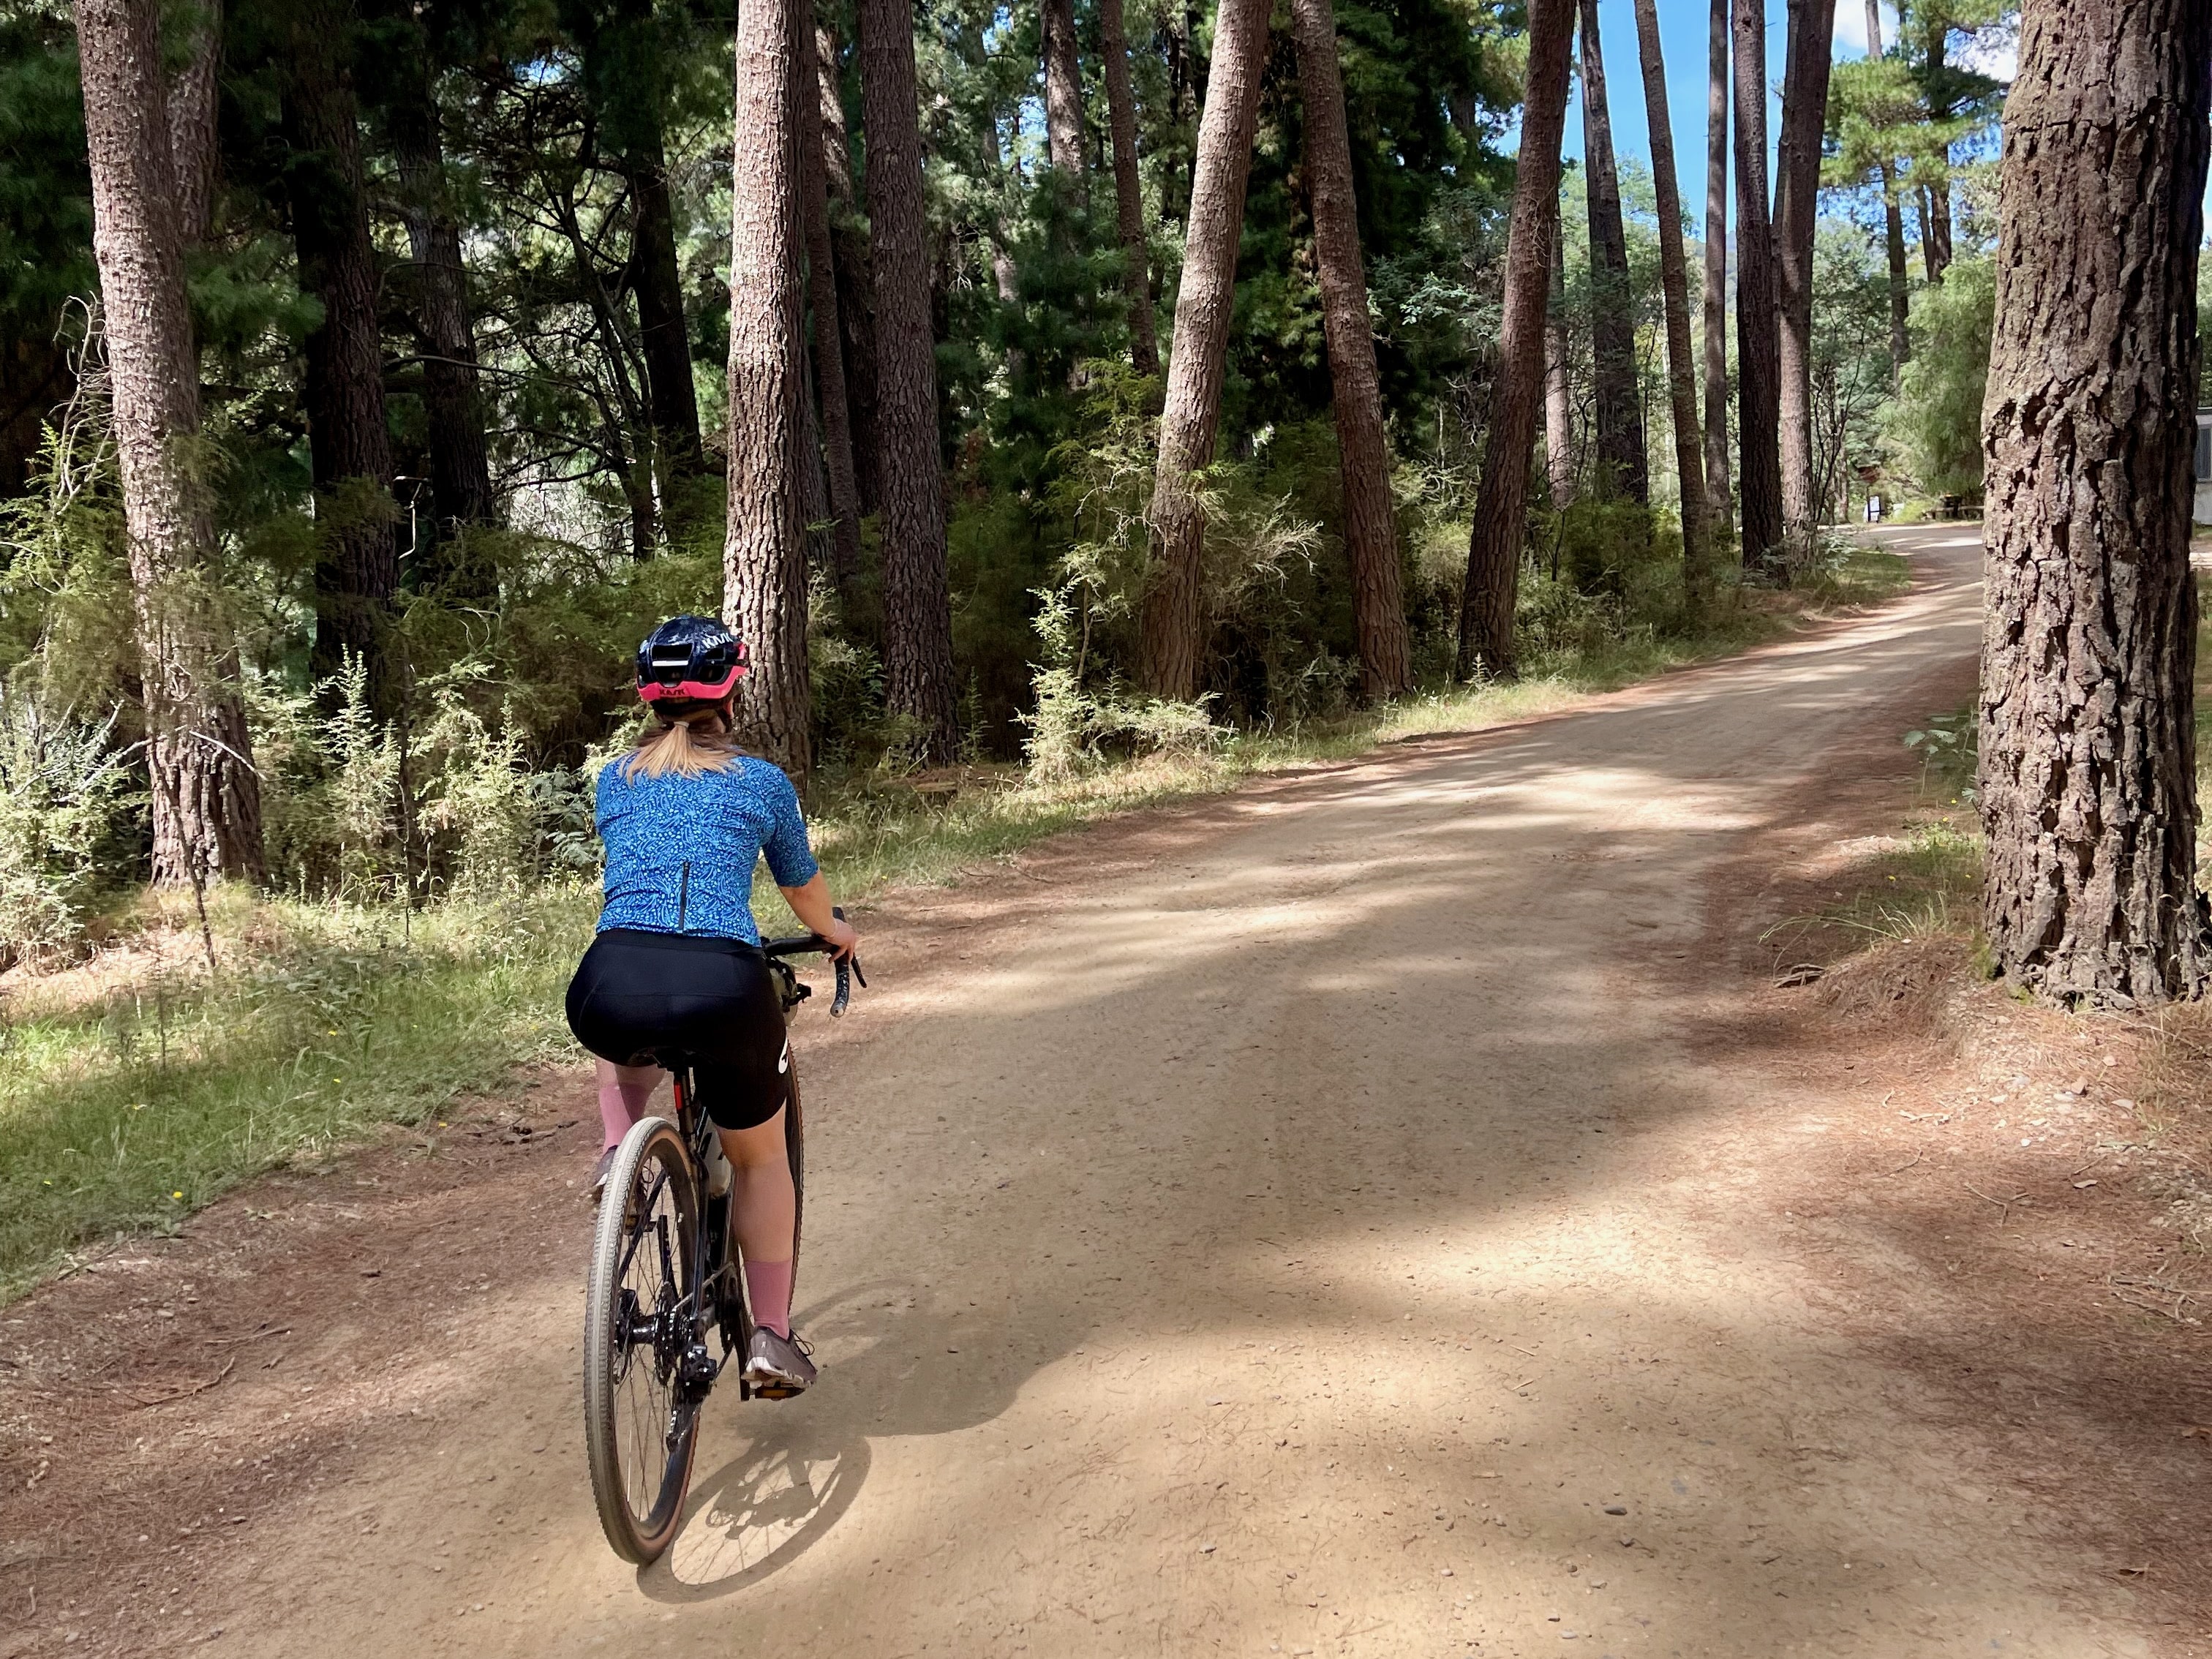 A female cyclist riding on a smooth gravel road lined with tall trees